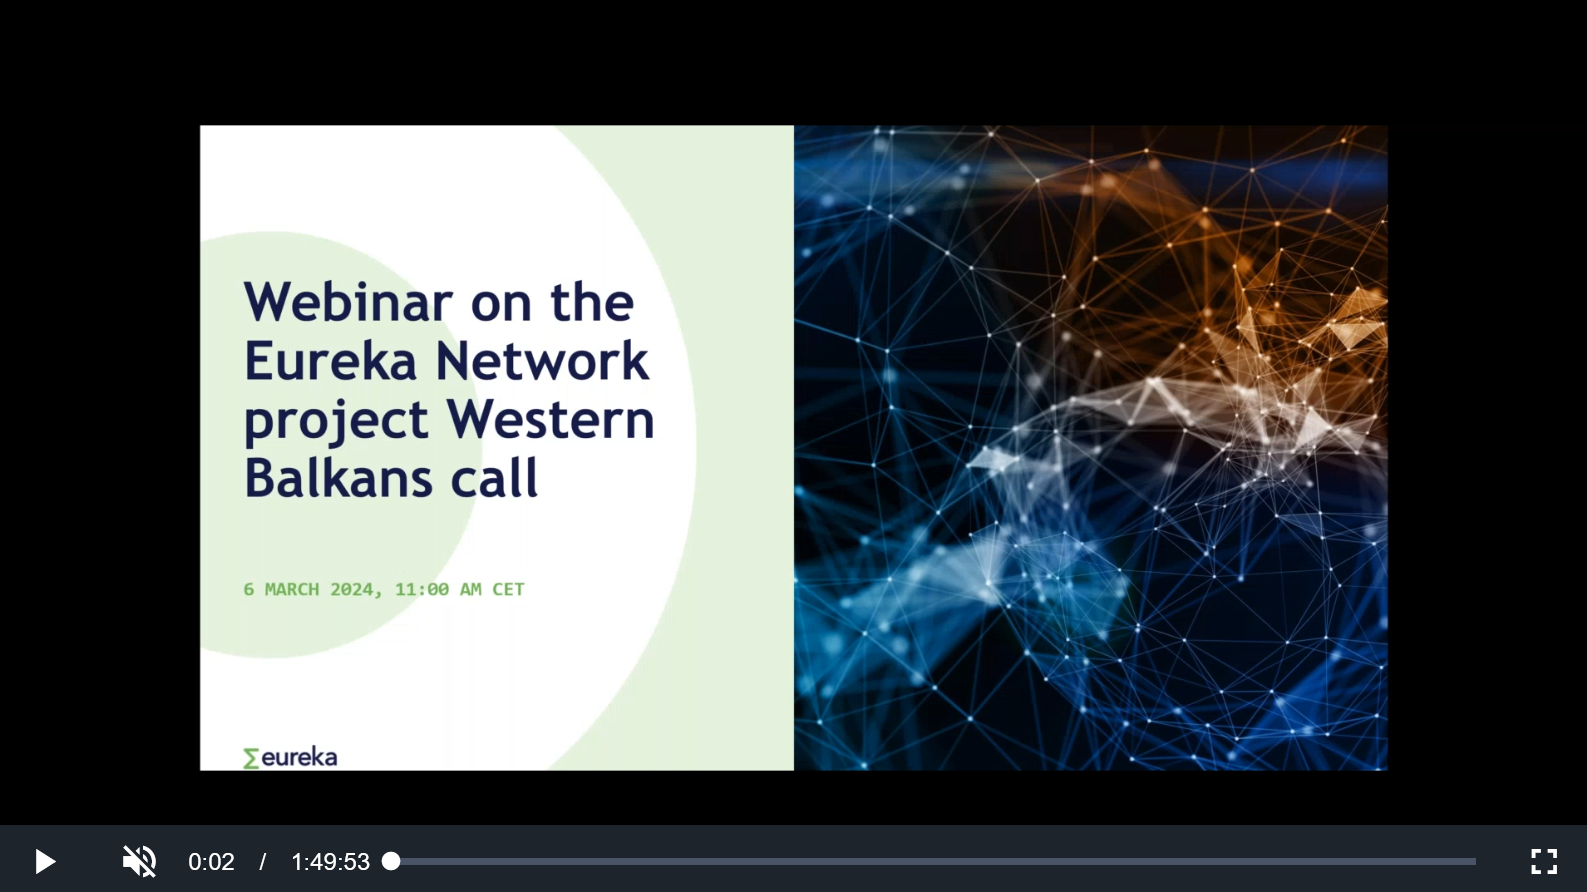 Recording and Presentation of the Webinar Dedicated to the EUREKA Western Balkans Call is available